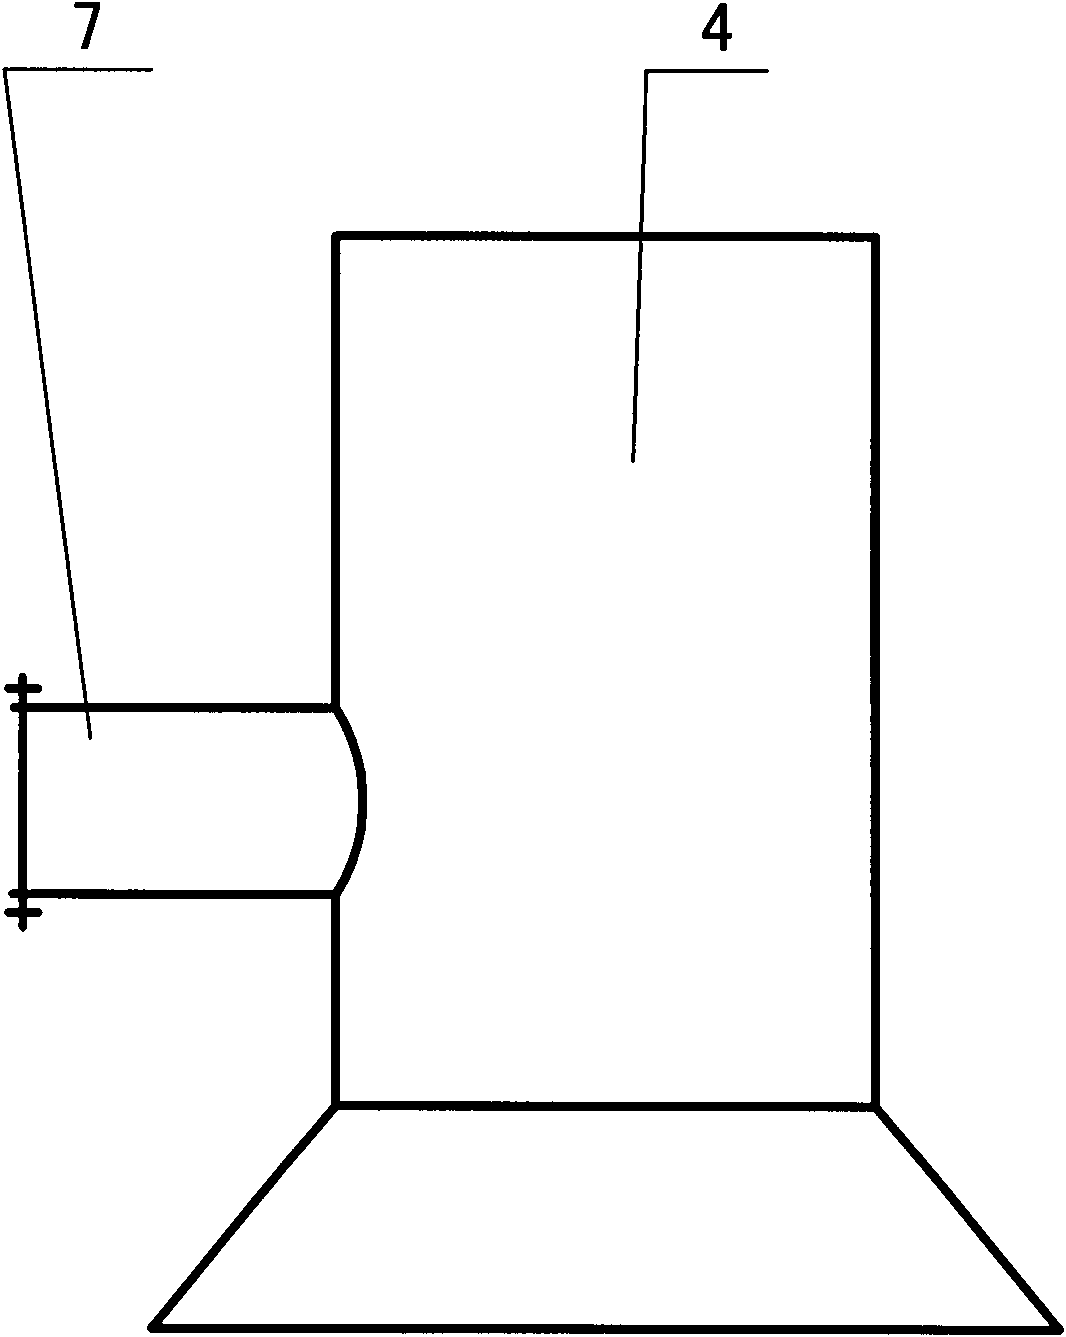 Flue-gas dust removal and purification device